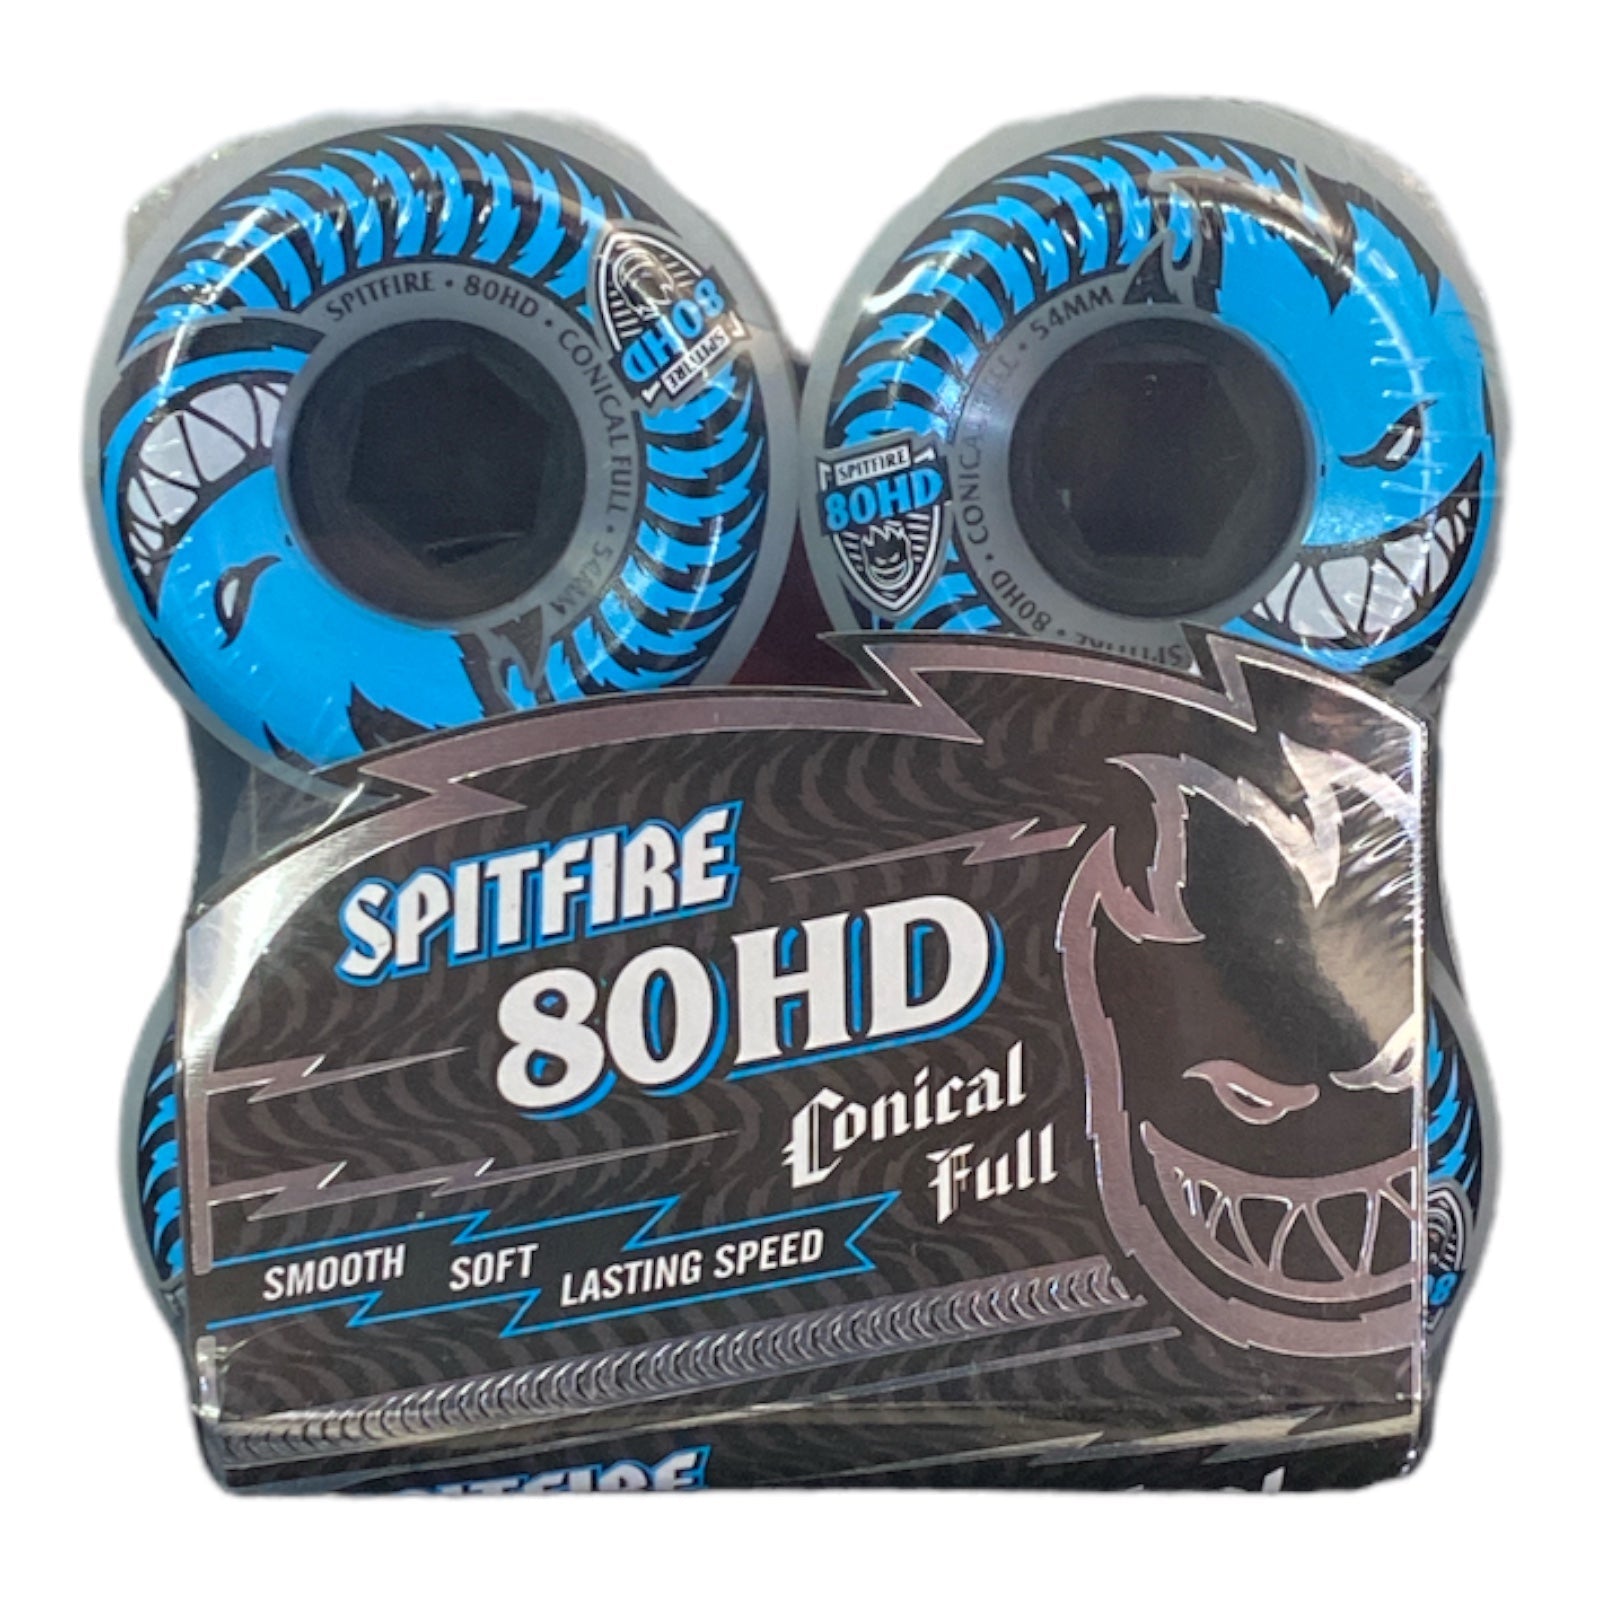 Spitfire 80HD Conical Full